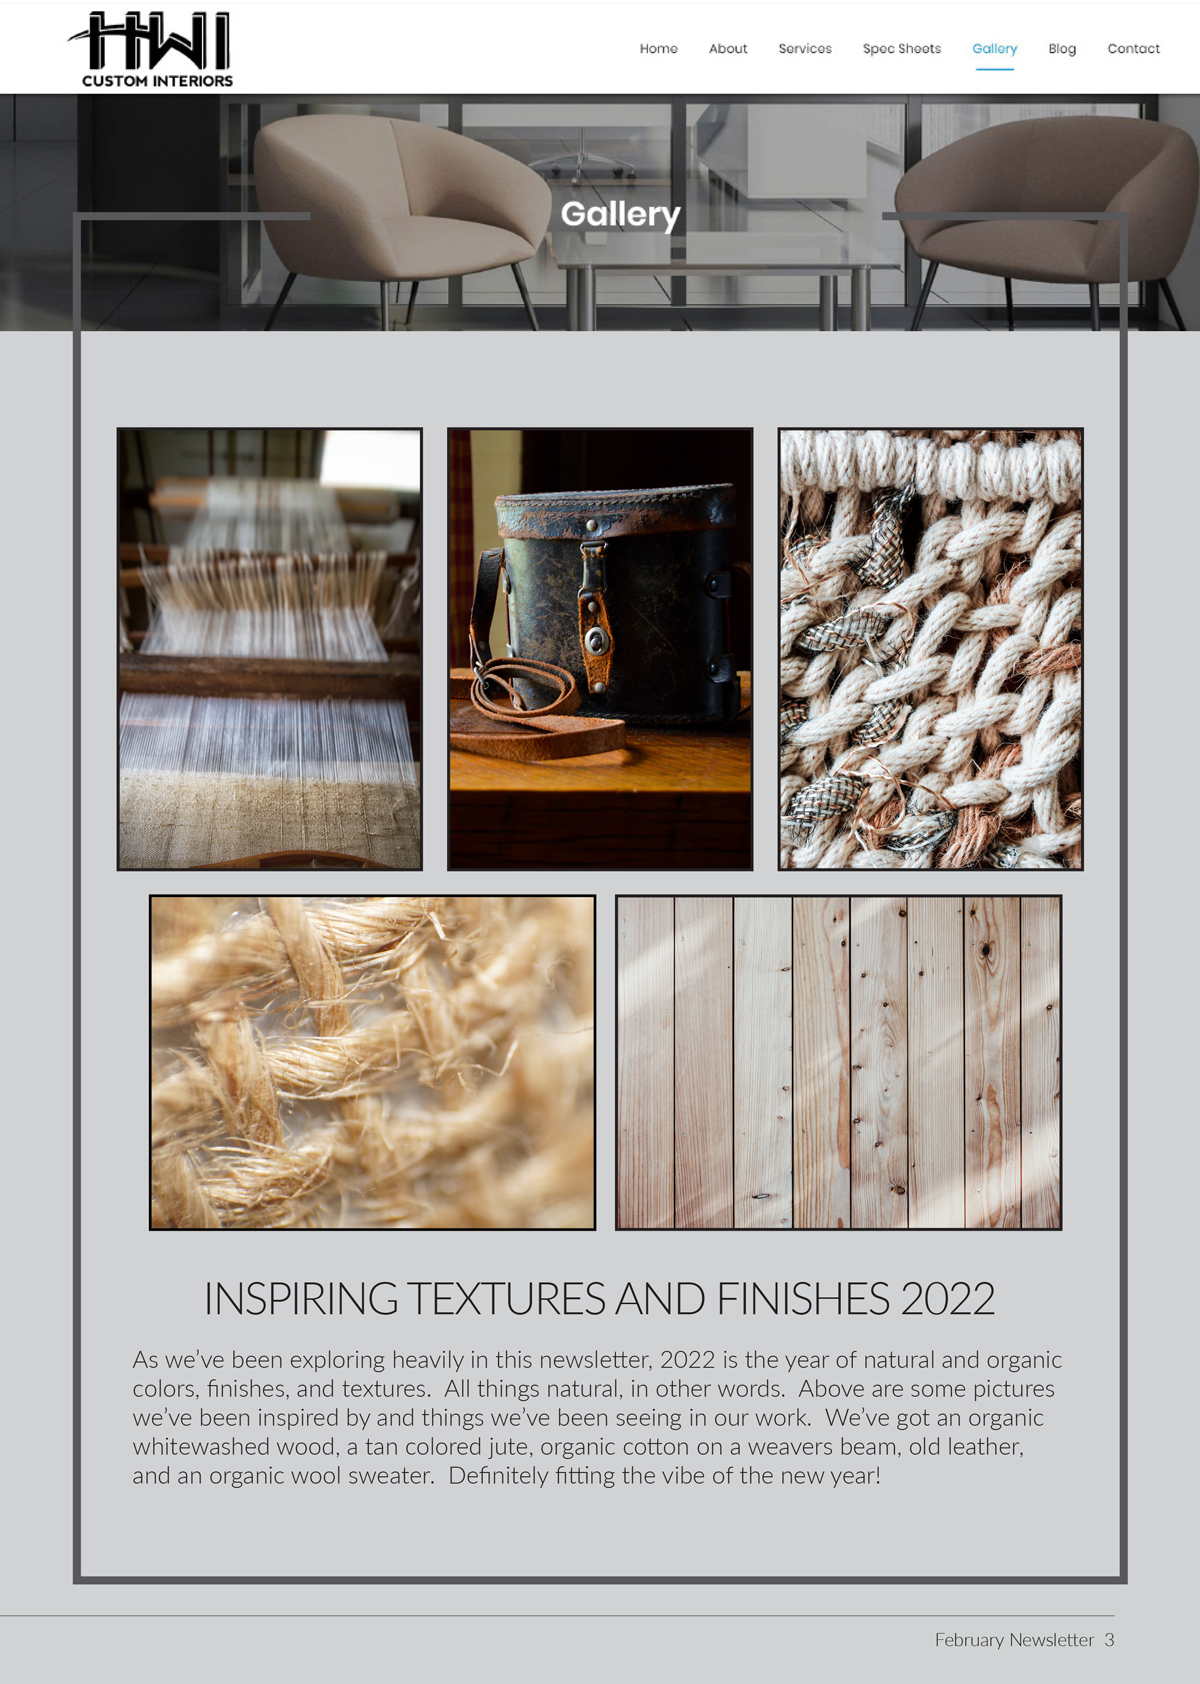 Inspiring textures and finishes 2022. Inspiration photos included whitewashed wood, tan colored jute, organic cotton on a weavers beam, old leather, and an organic wool sweater.